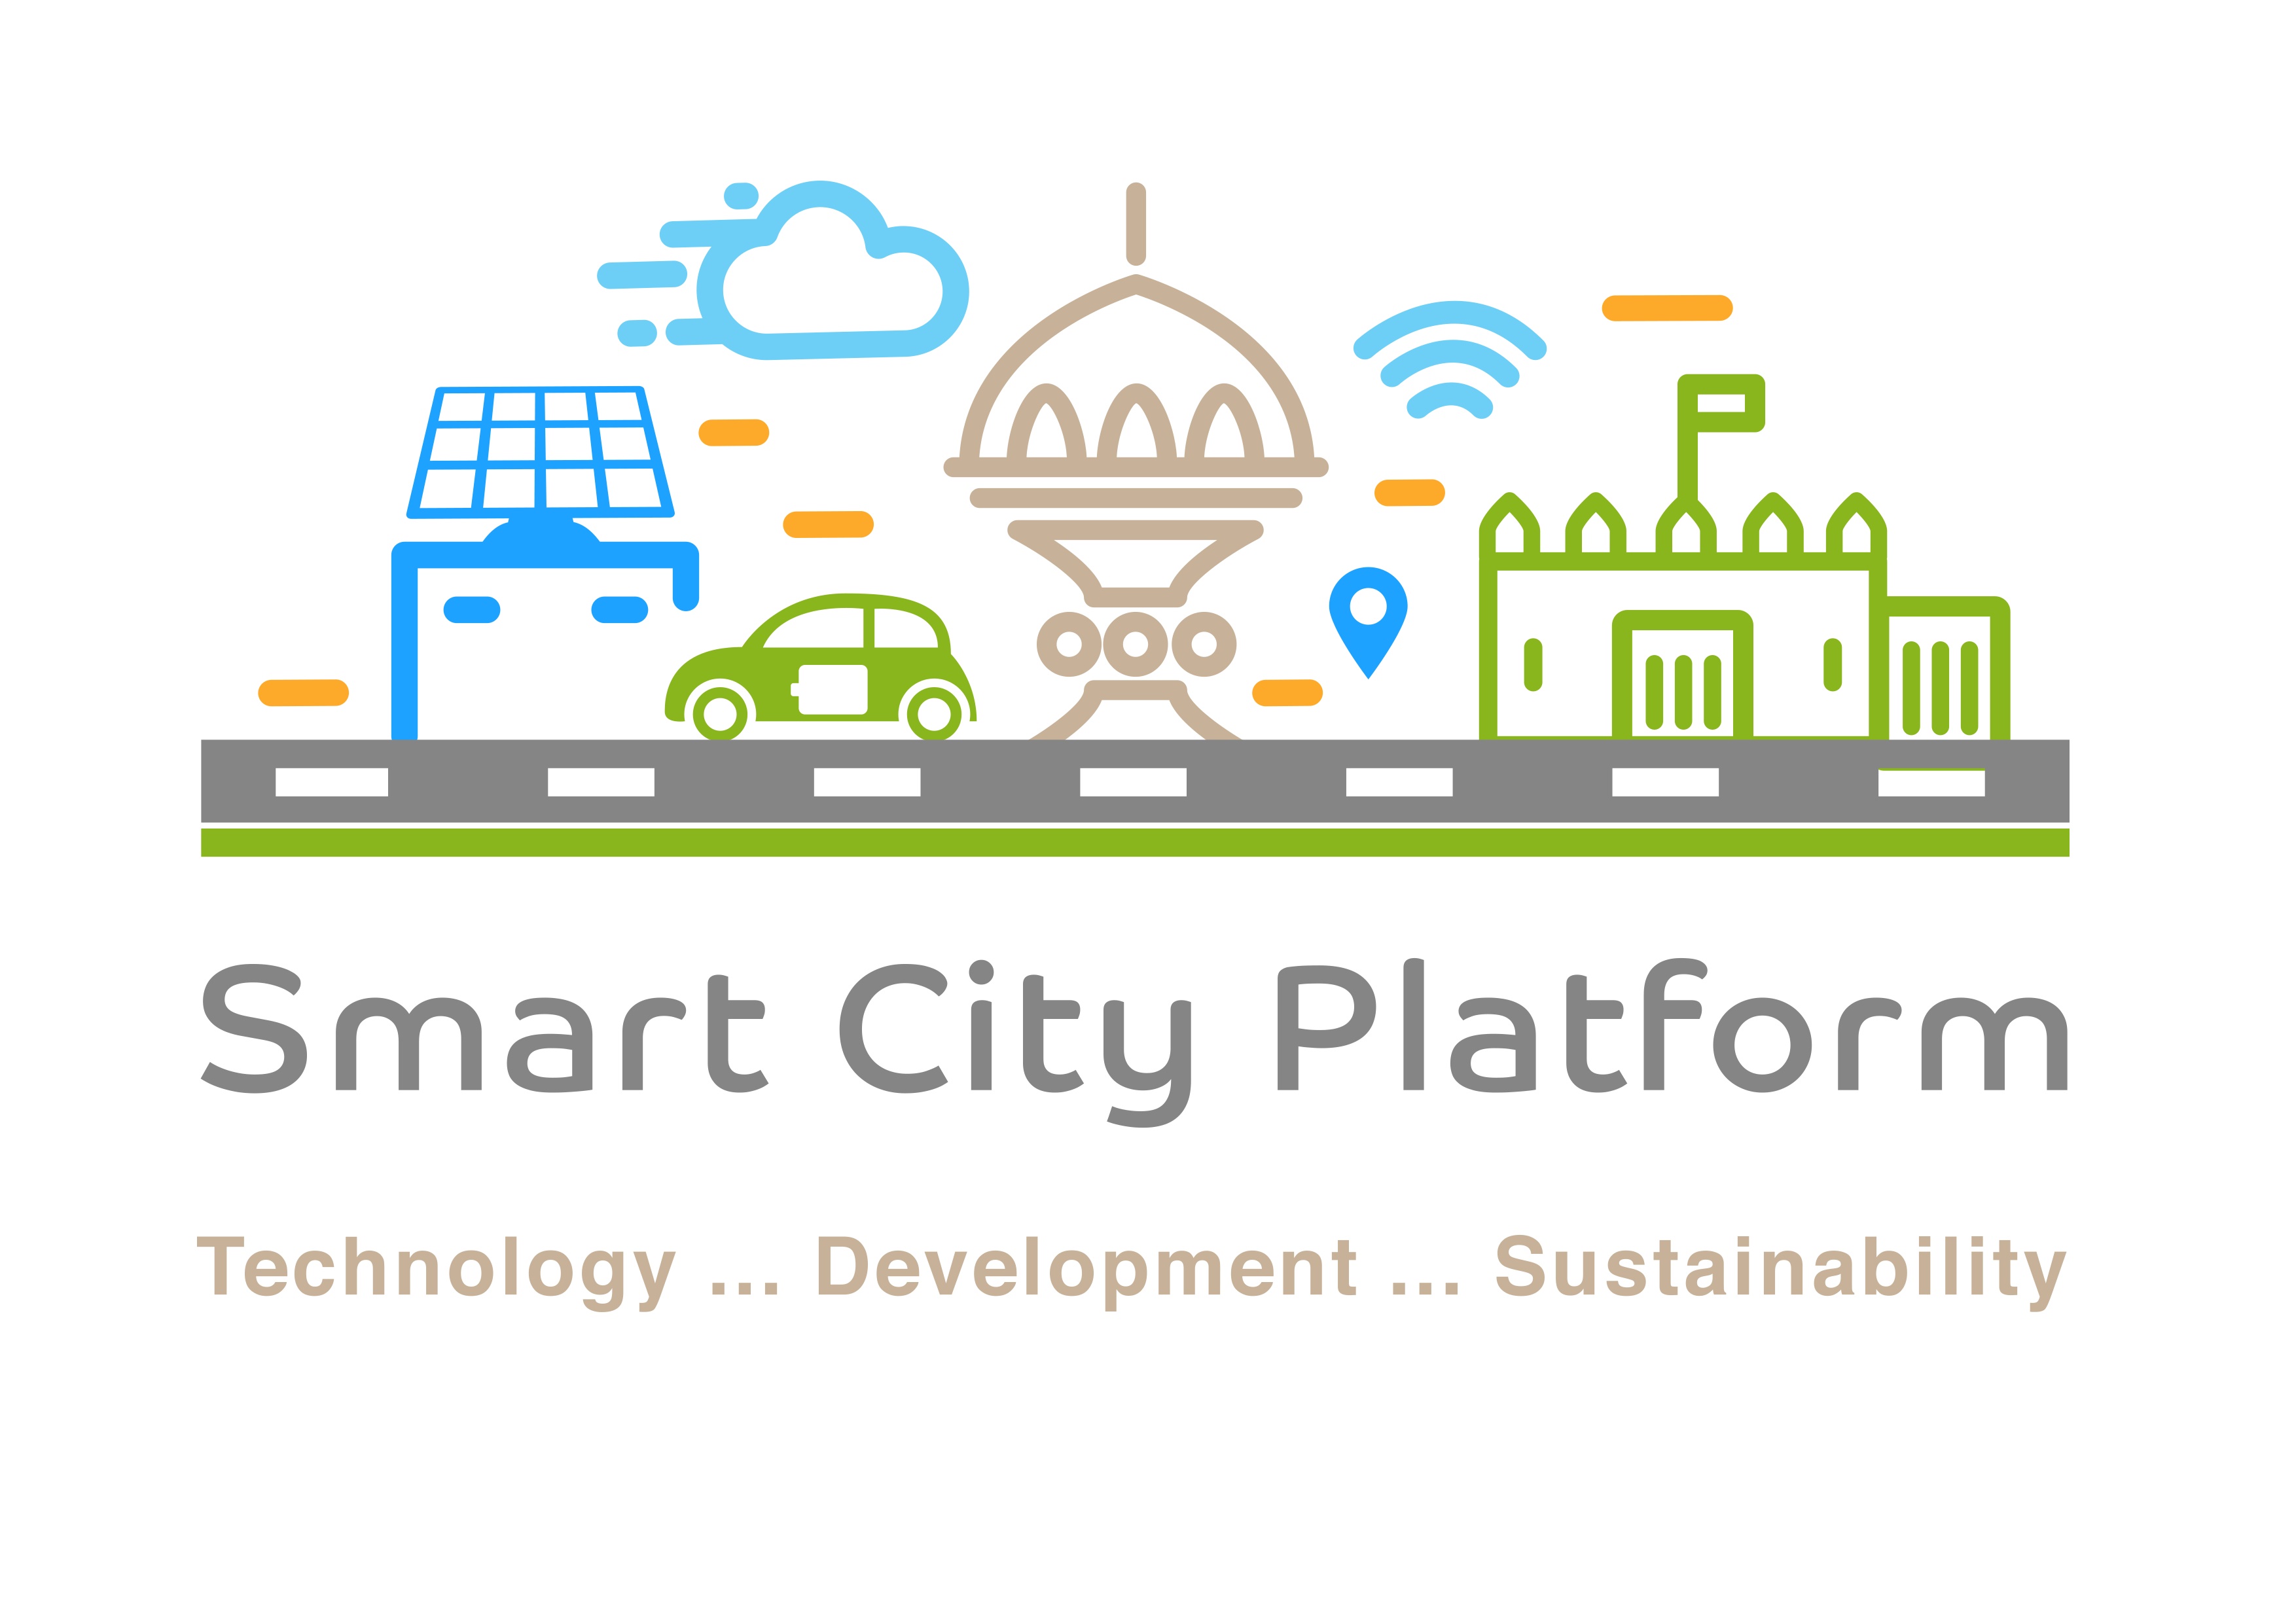 Virtual global symposium on Smart Cities Without Borders from June 10